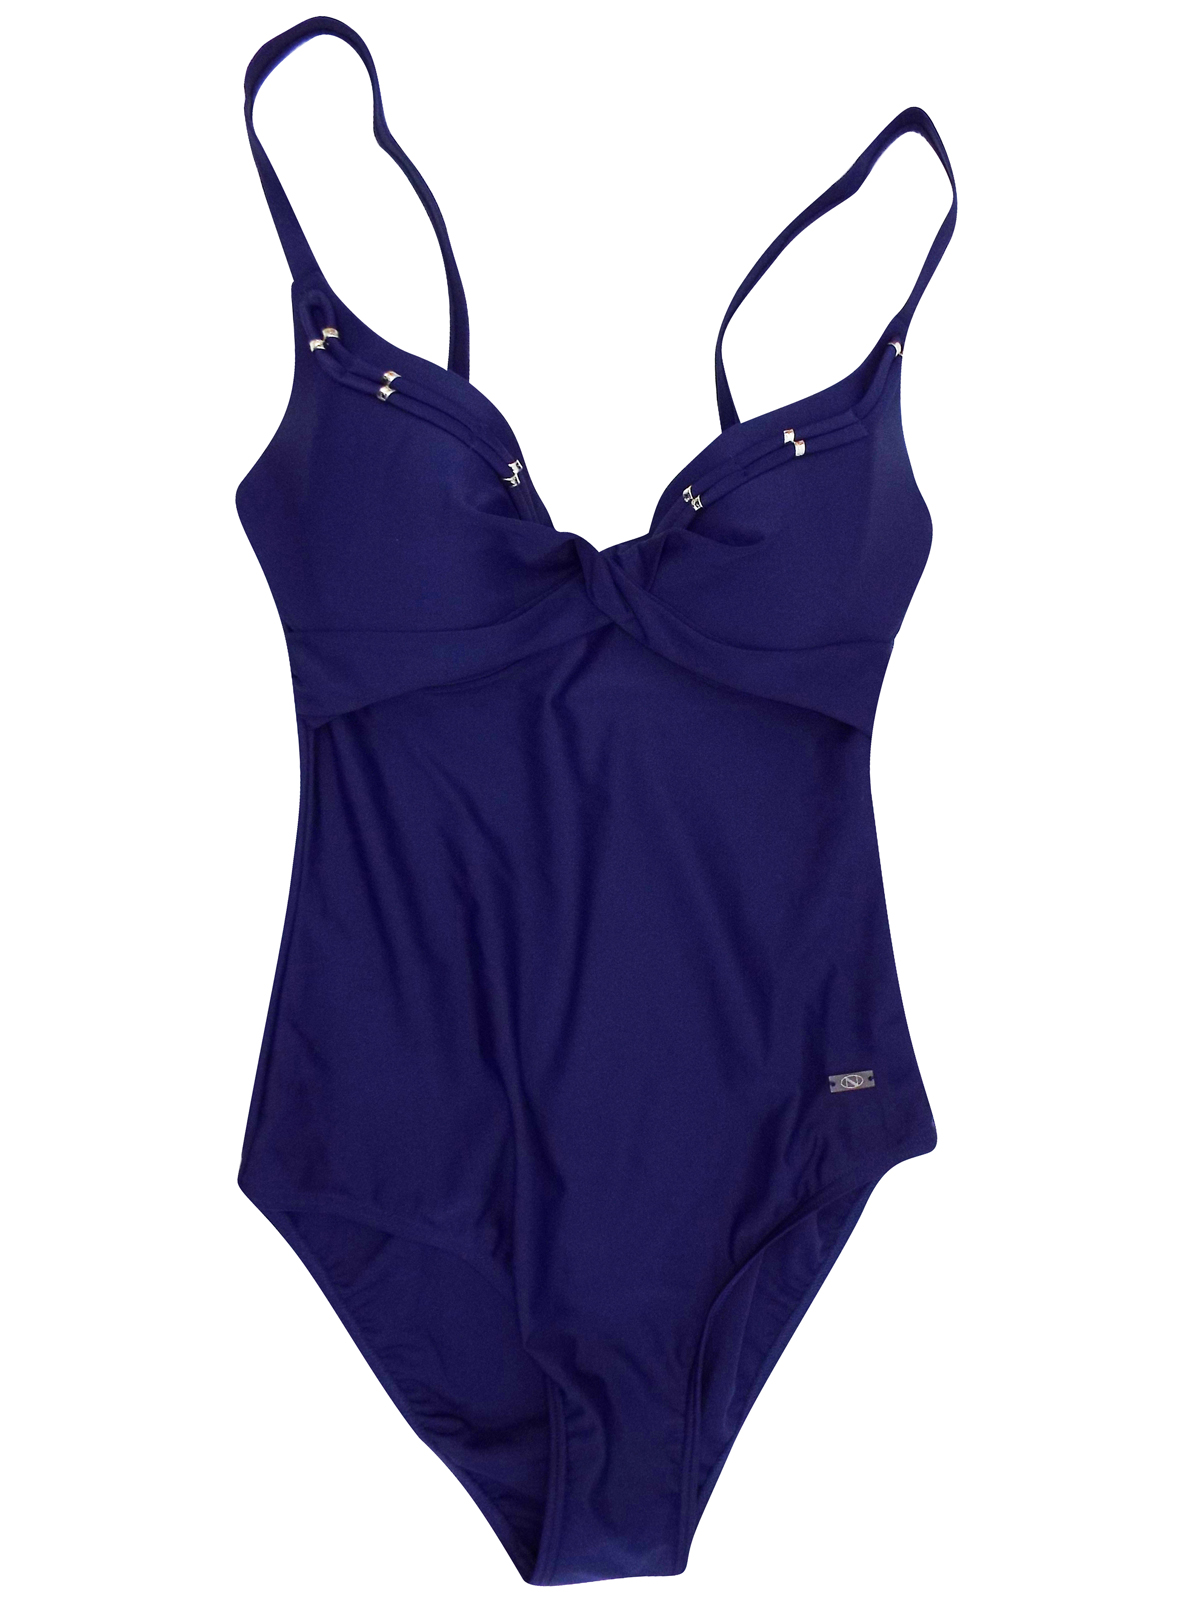 Naturana Naturana Navy Multiway Strap Twist Front Swimsuit Size 2215